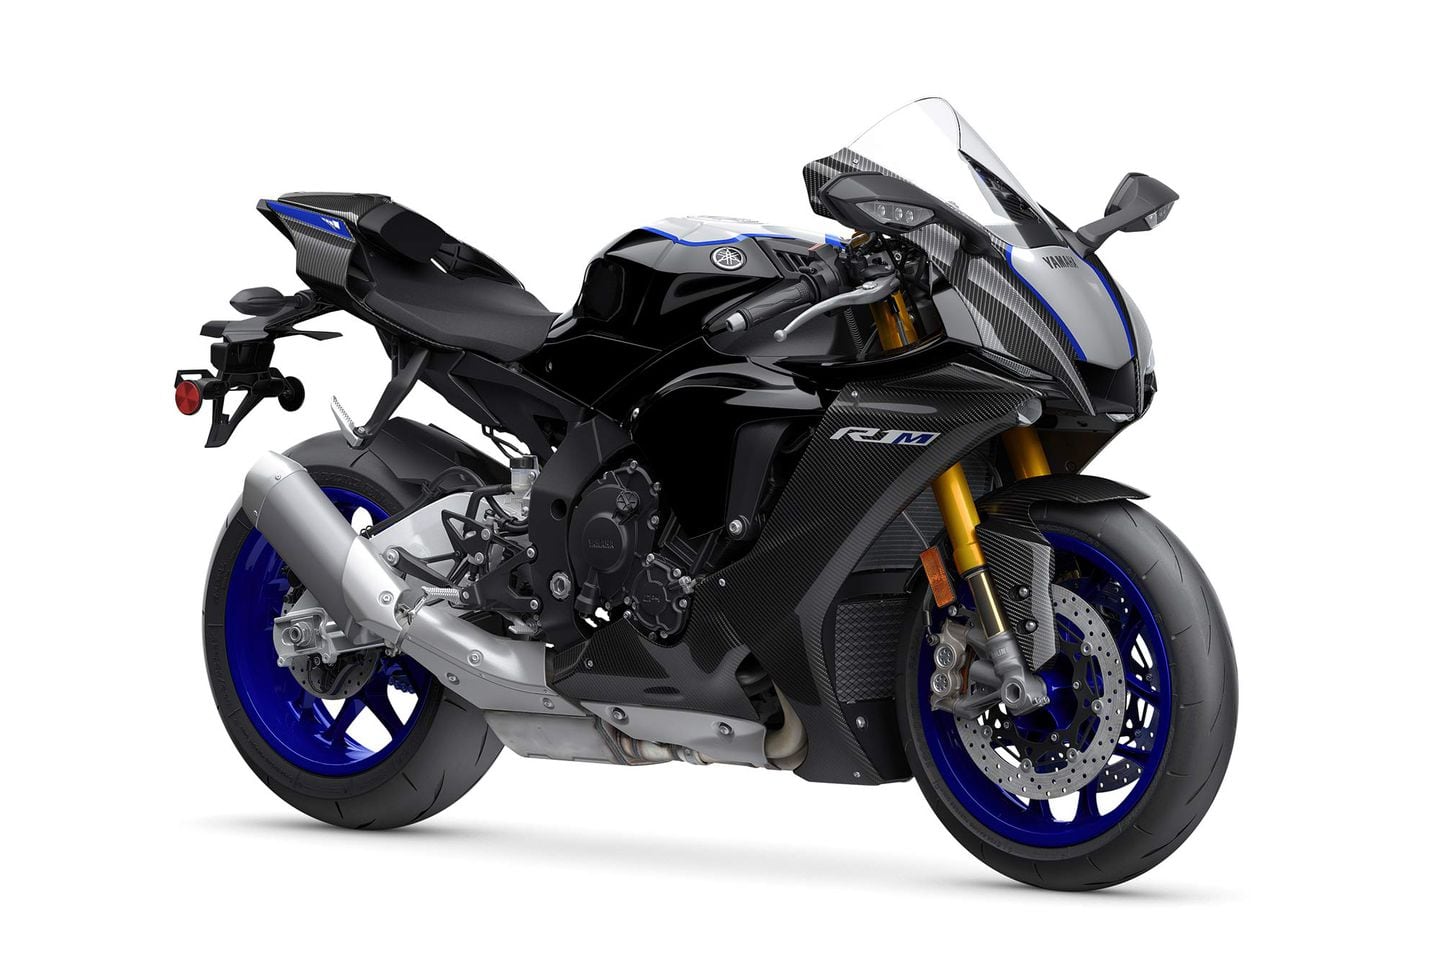 2021 Yamaha YZF-R1/M Buyer's Guide: Specs, Photos, Price